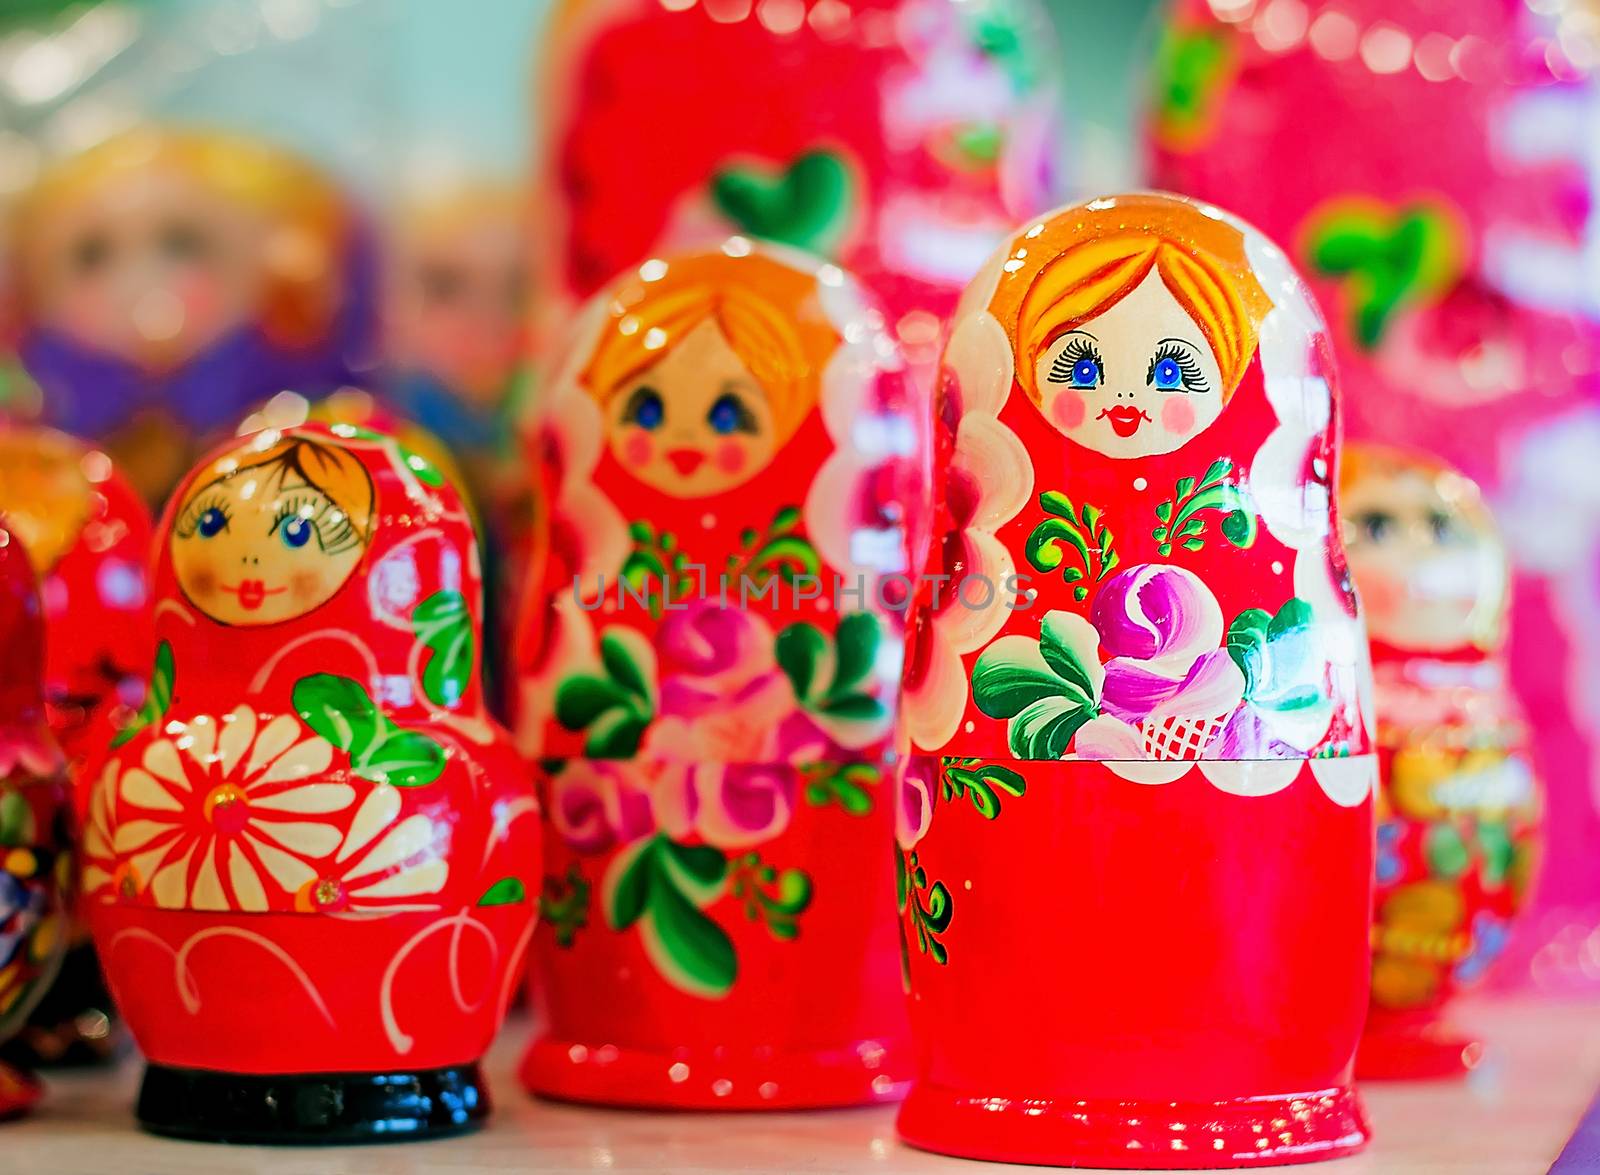 Traditional Russian toys for children - nested doll dolls. by georgina198